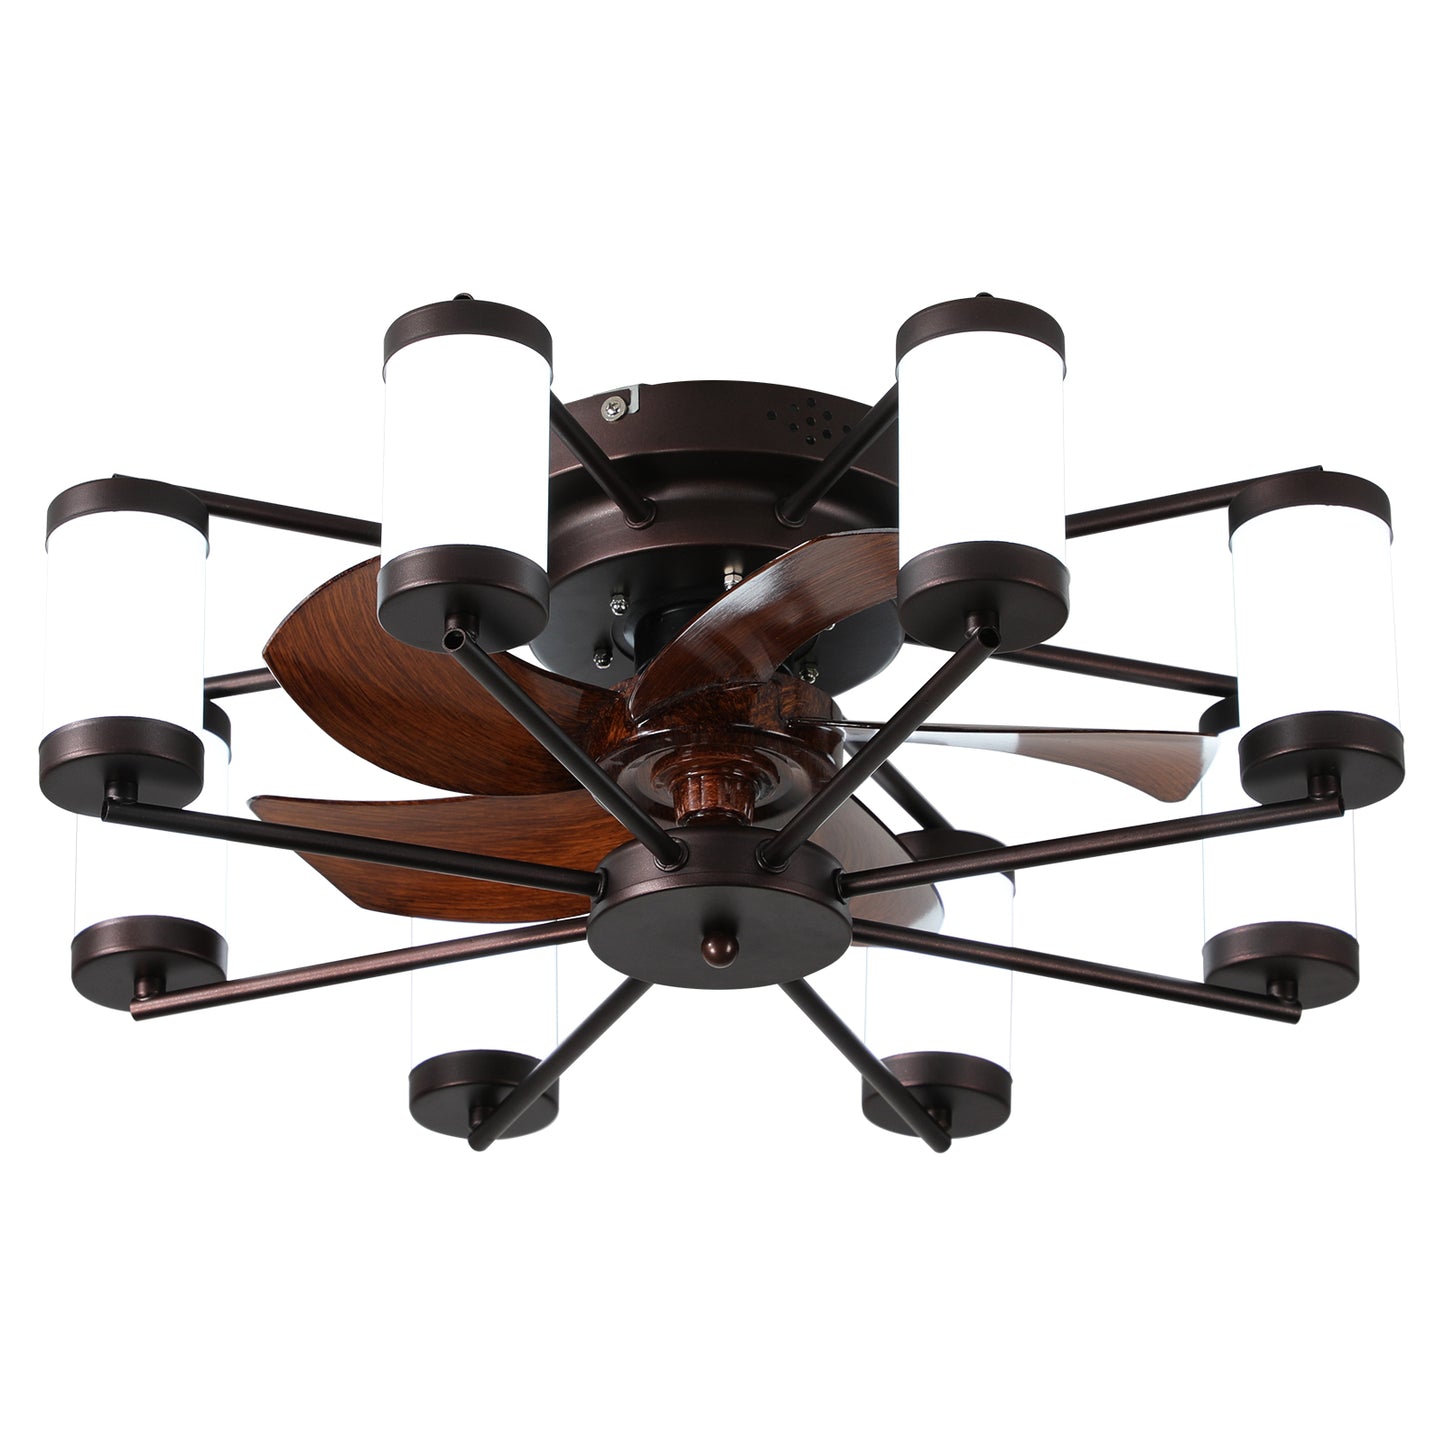 21.7 Ceiling Fan with Dimmable Light DC Motor and Remote Control - Modern Design for Living Room